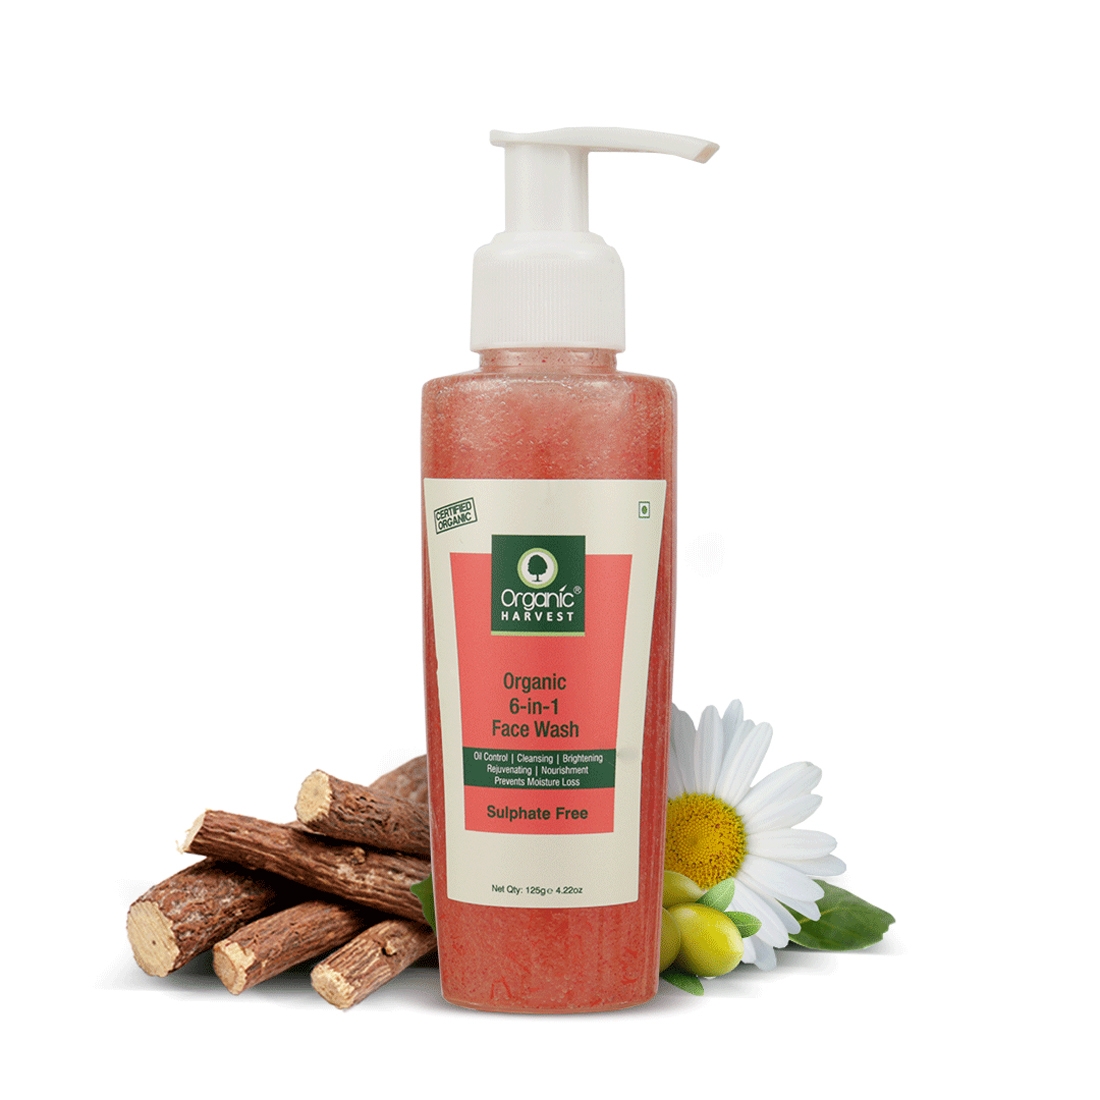 Organic Harvest | Organic Harvest Face Wash - 6 in 1 (Sulphate Free), 125gm